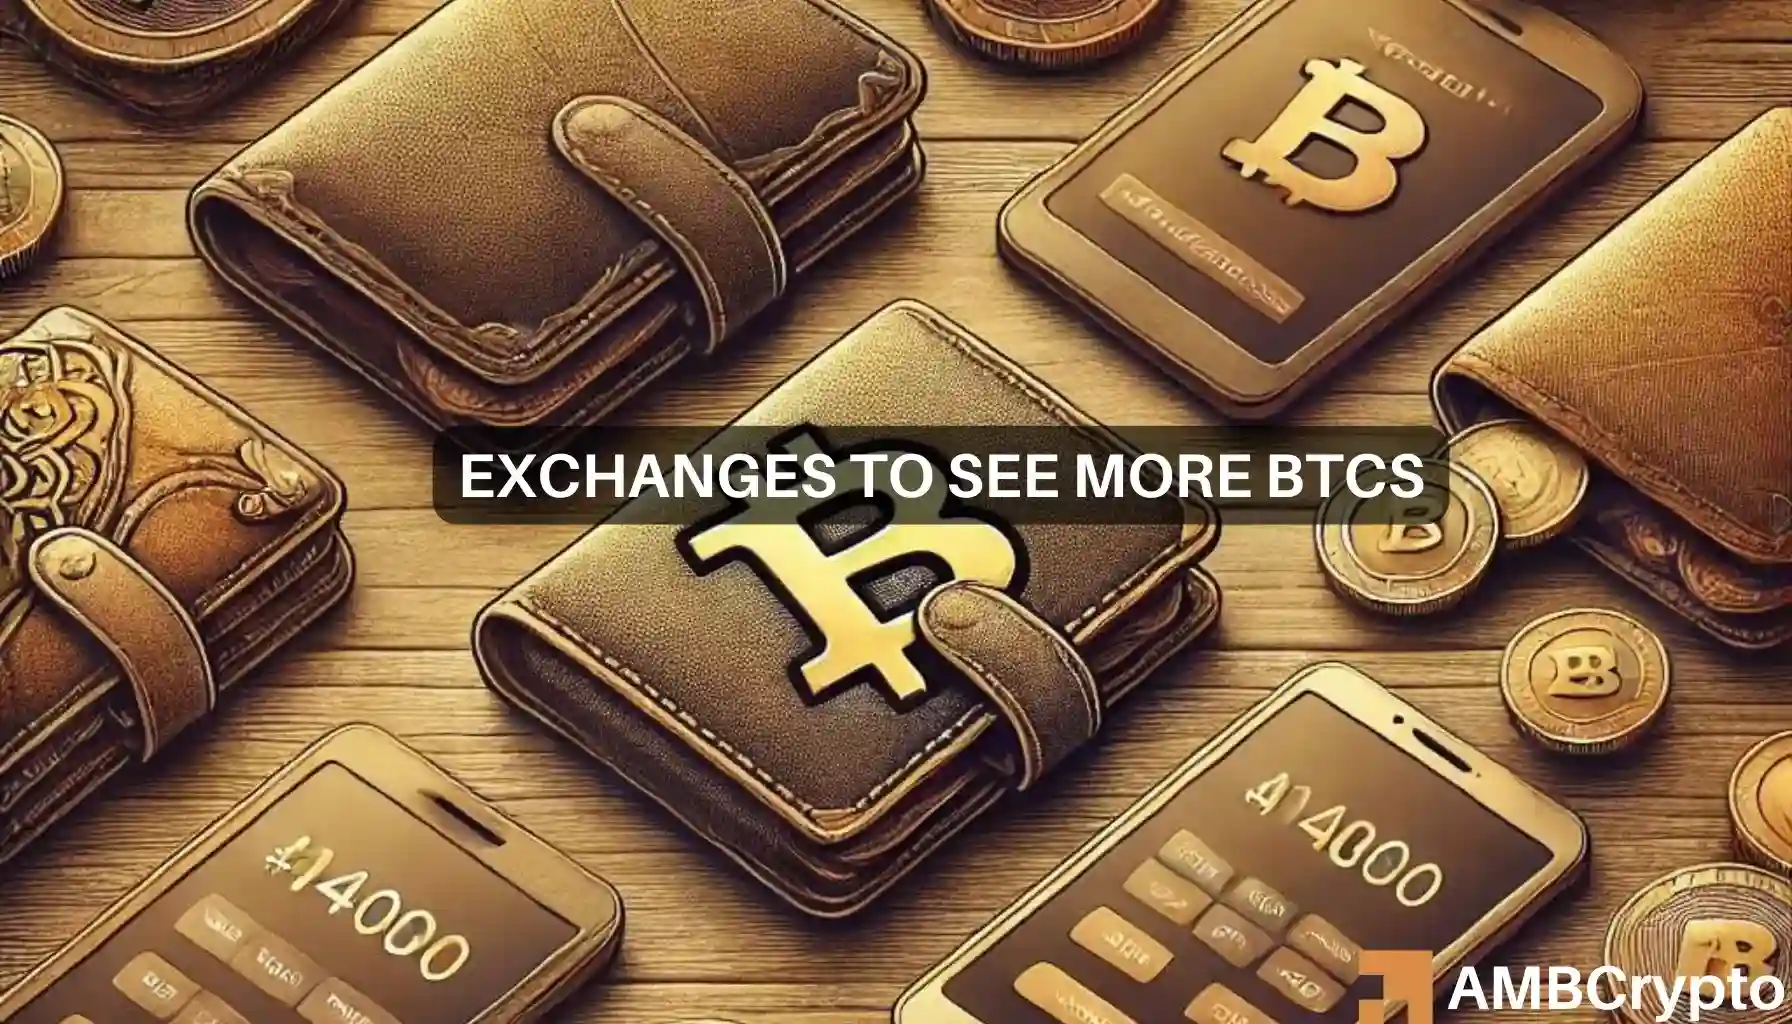 Over $1 billion in Bitcoin moved to exchanges – Here’s what’s going on!